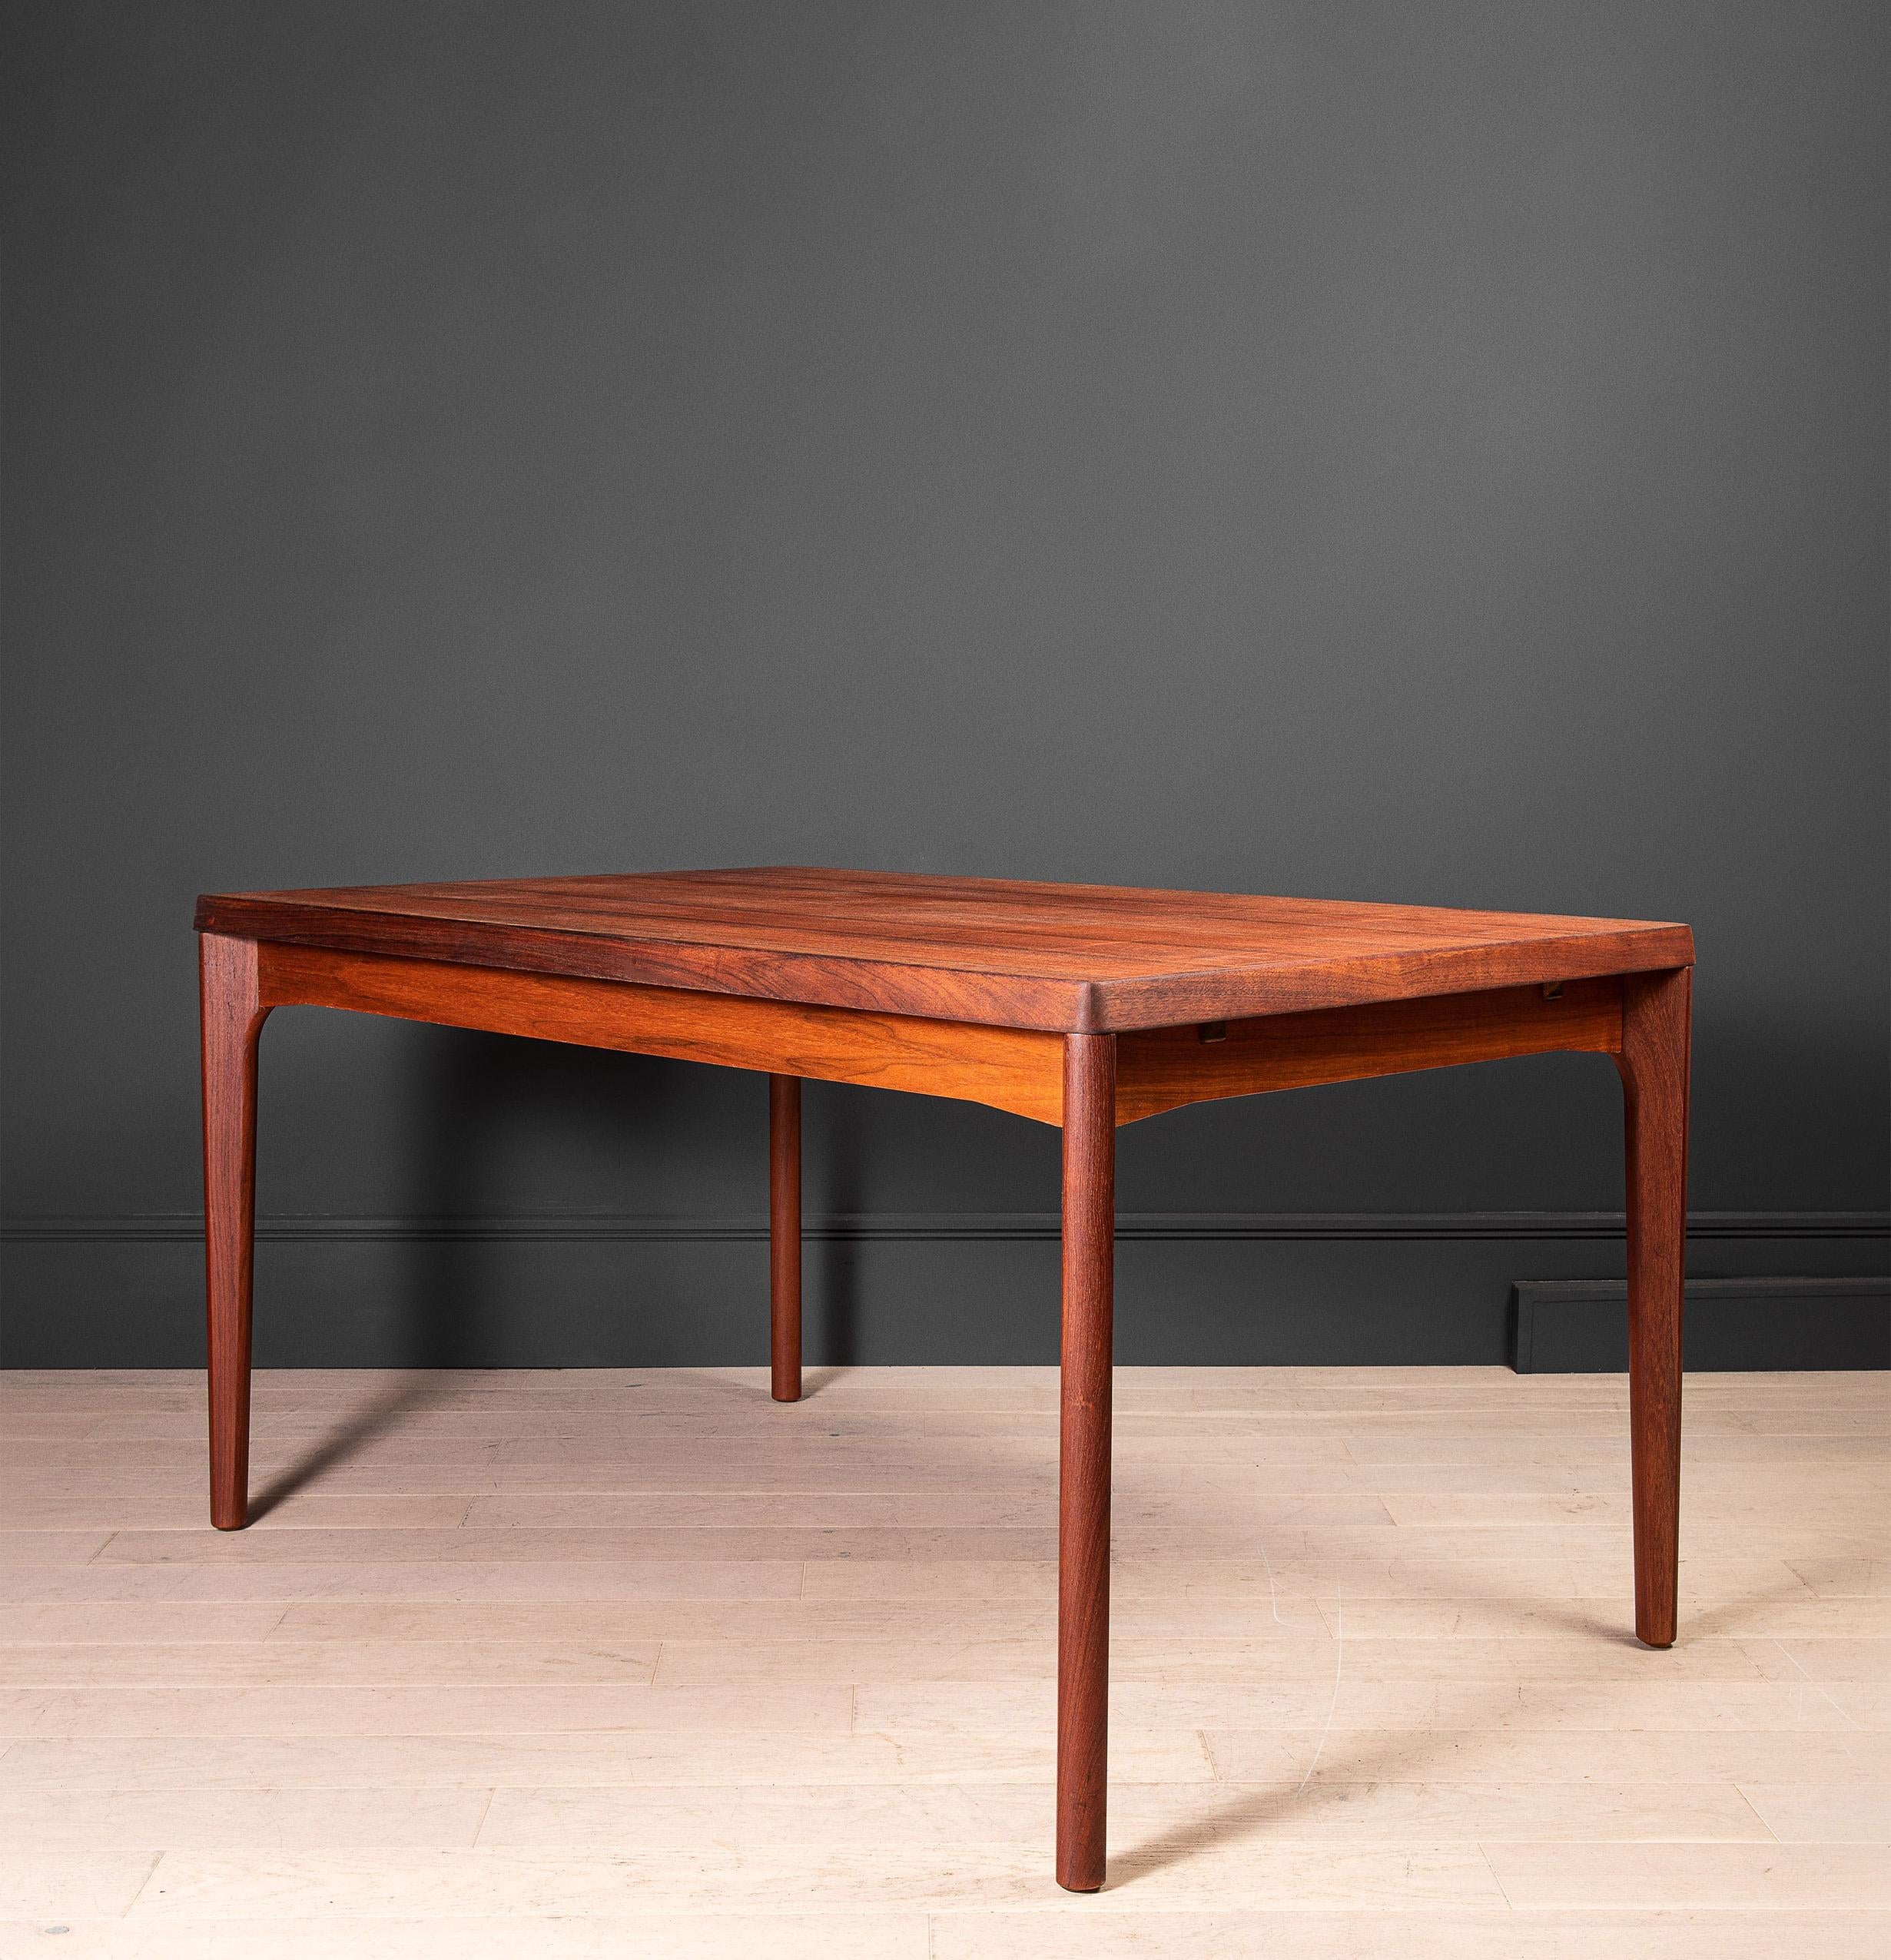 A lovely Minimalist table design by Henning Kjaernulf. Made from teak with 2 hidden slide out extending leaves under the main surface. Denmark circa 1960. Set of 8 Henning chairs also available separately.